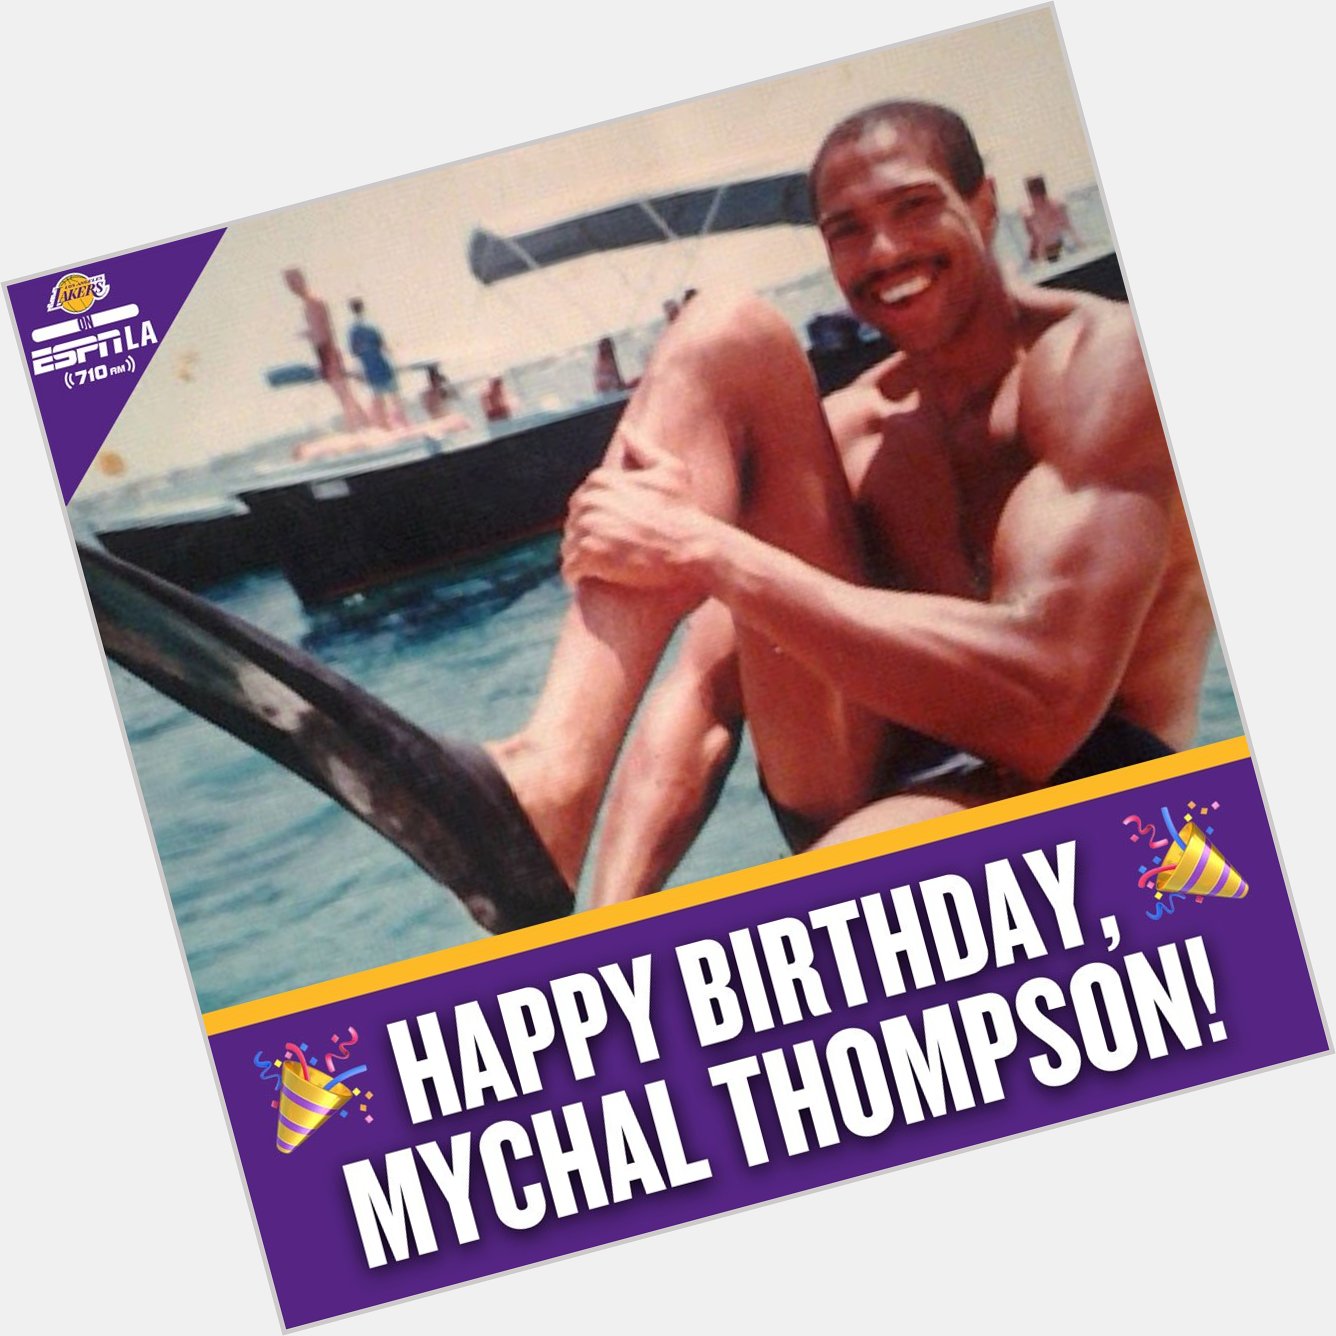 Happy birthday to the Bahamas\ finest, Mychal Thompson! 

Join us in wishing a very special day 